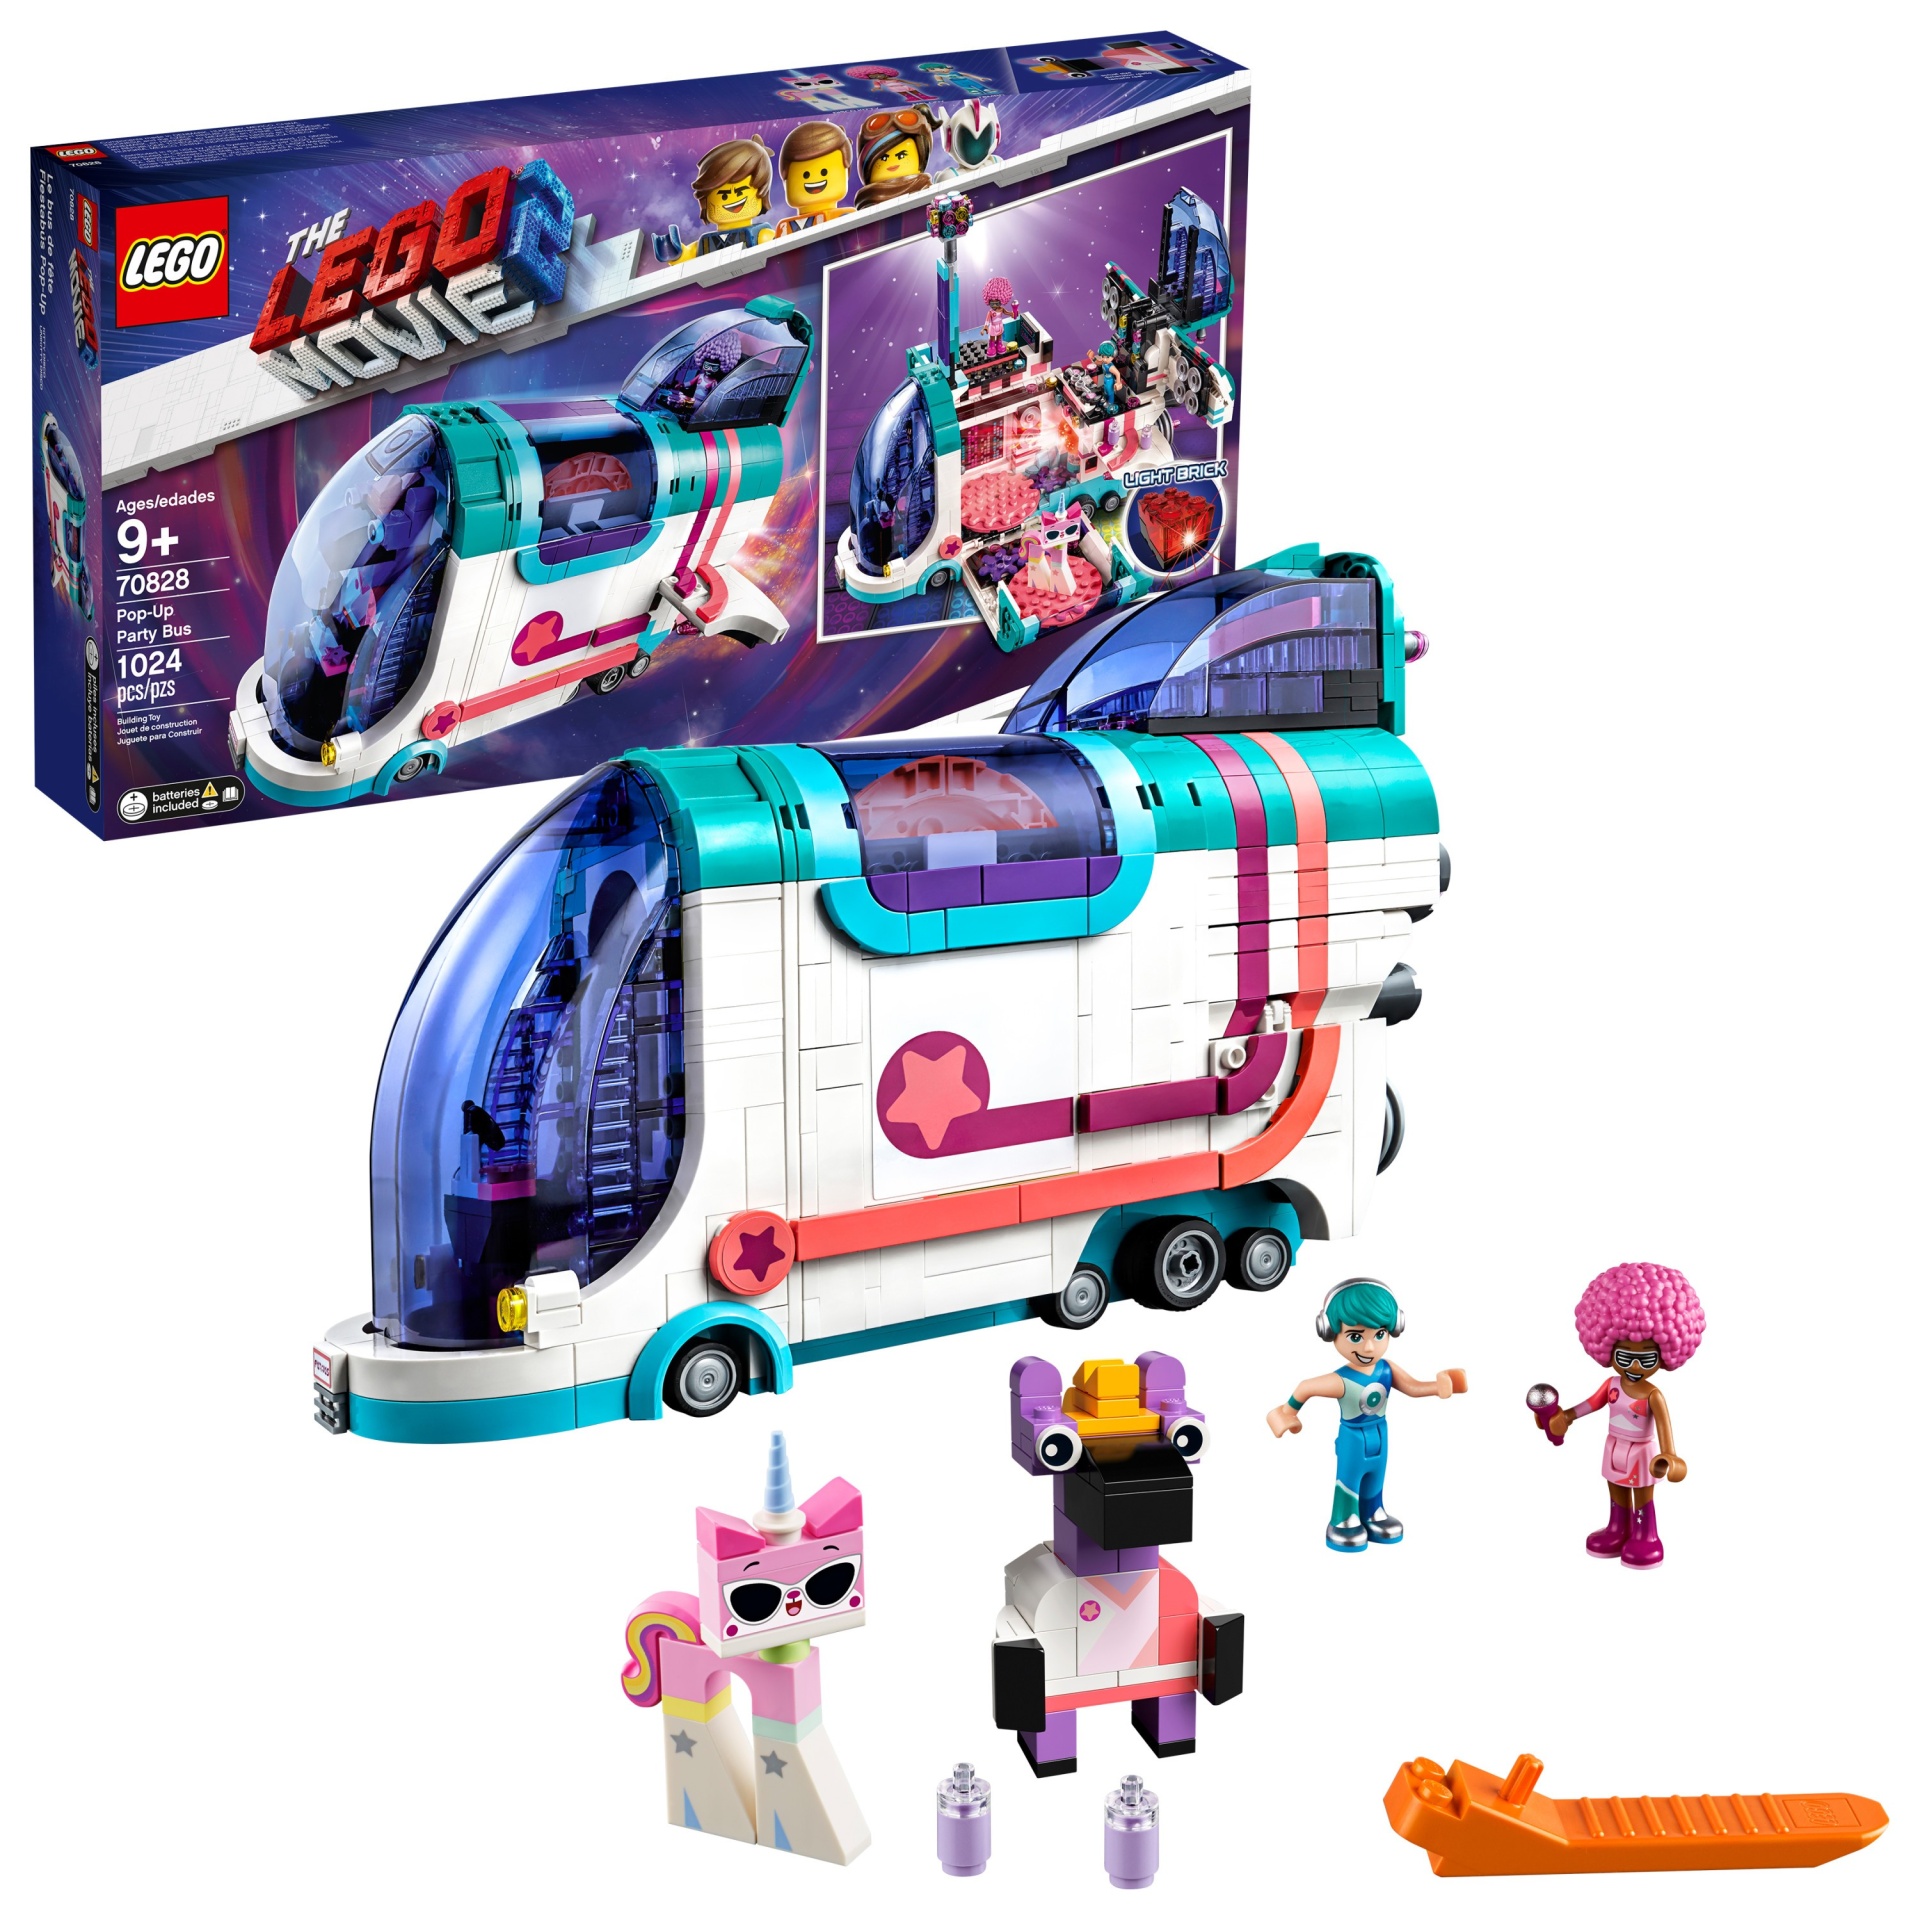 slide 1 of 1, THE LEGO MOVIE 2 Pop-Up Party Bus 70828, 1024 ct